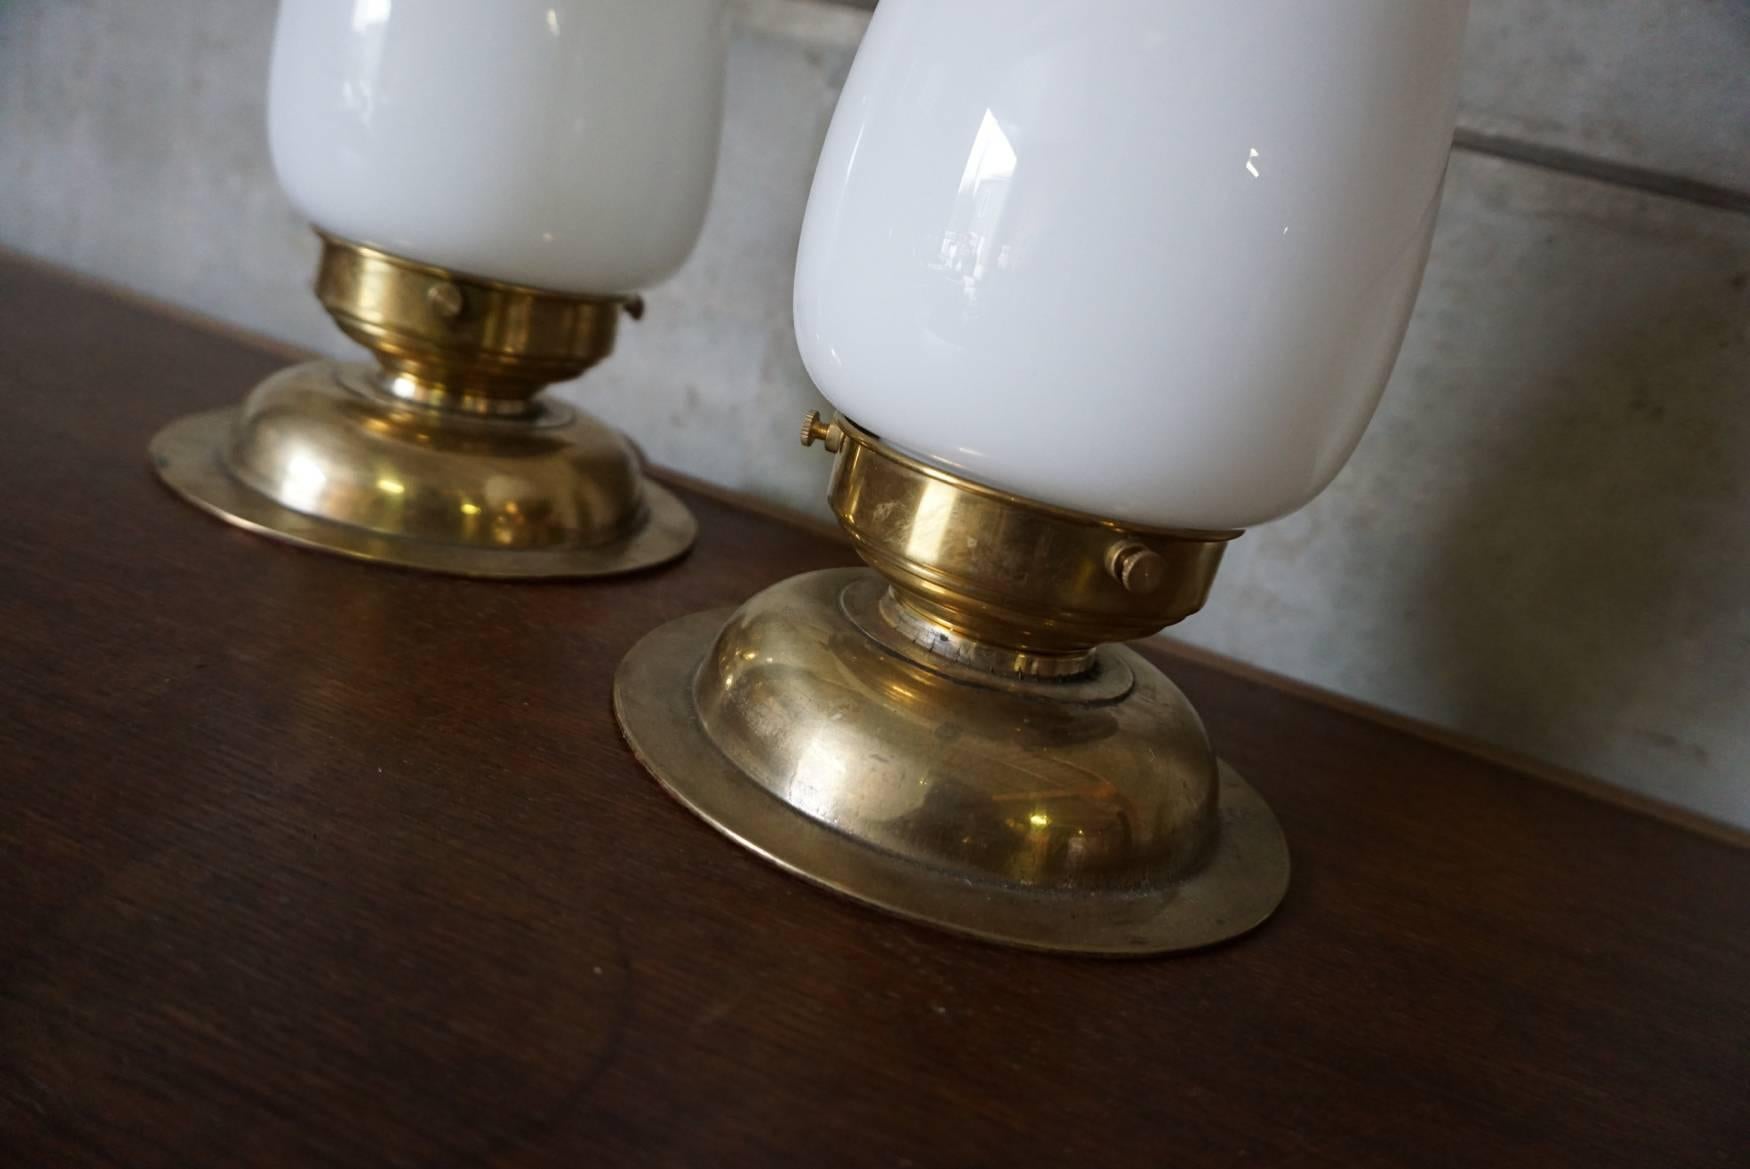 This pair of table lamps were designed between 1920-1930 and produced in Germany. The base is made of brass with glass shades. The lights are in good condition with only minor signs of wear. They are equipped with E27 sockets and rewired.